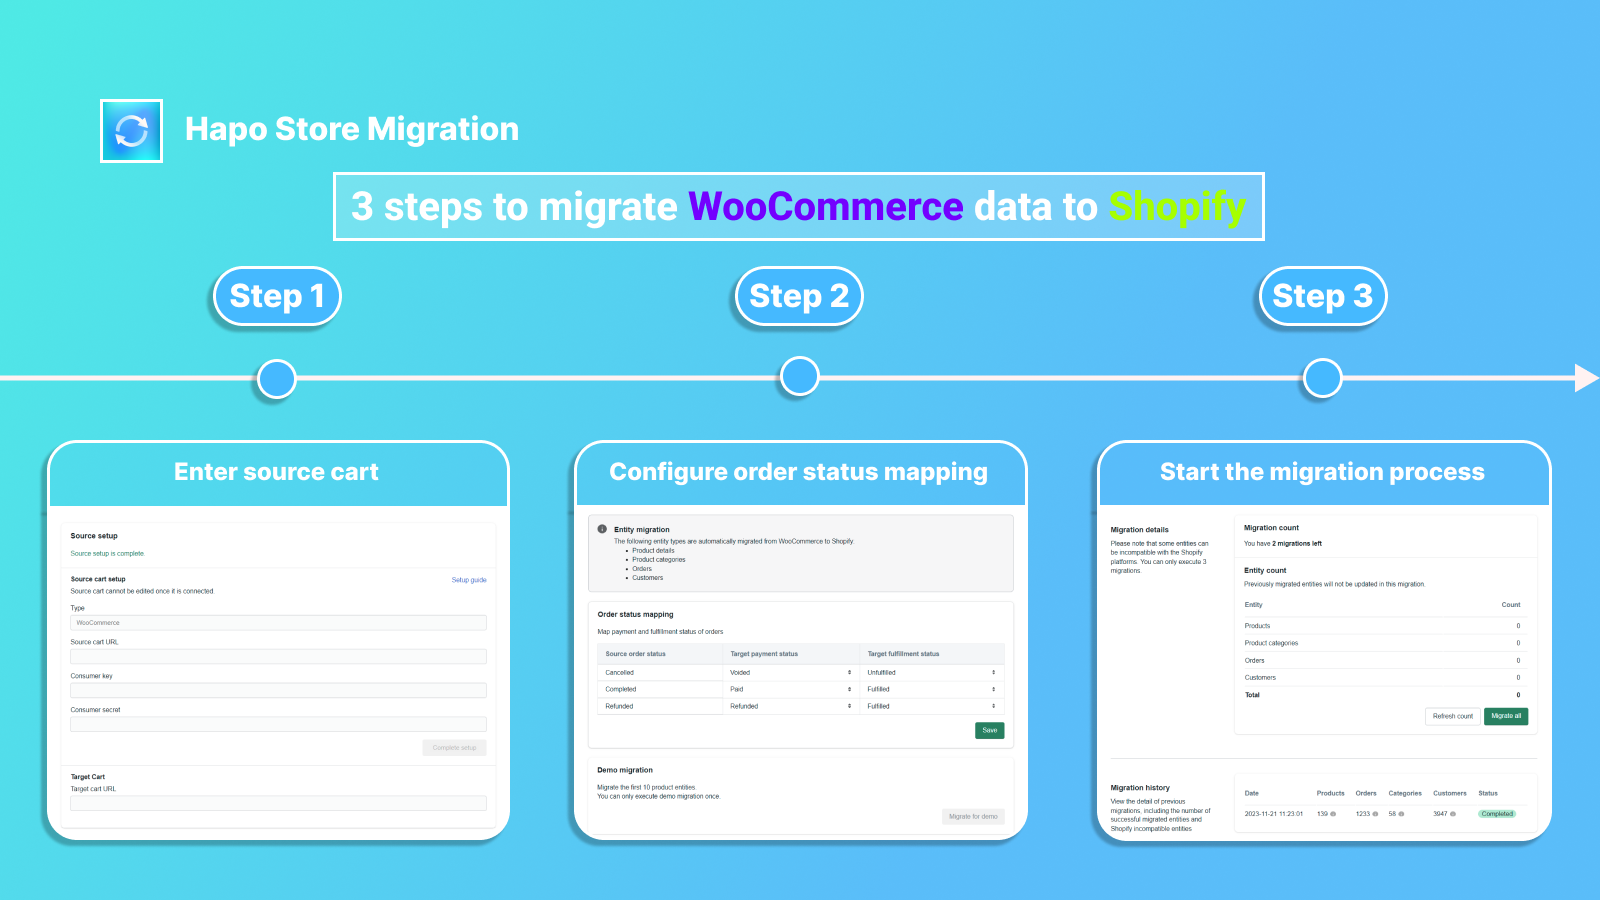 3 steps to migrate data from WooCommerce to Shopify